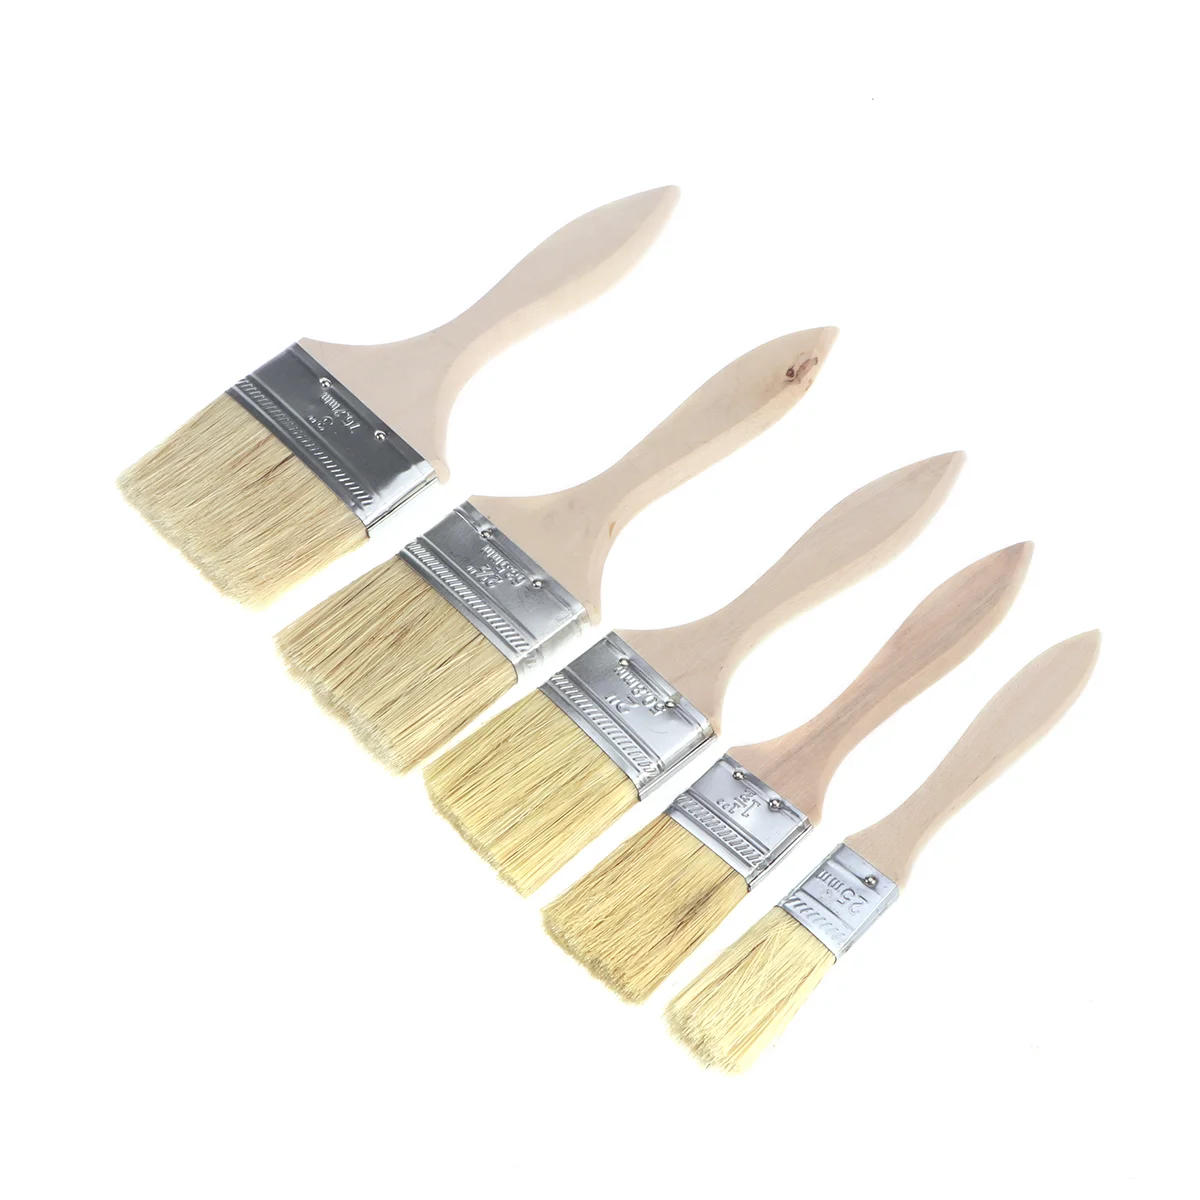 Paint Brushes with Wooden Handle Paint Brush for Outdoor Decor Paint Brushes Easy To Clean Wooden Cleaning Brush outdoor pool vacuum cleaning kit clean pool bottoms net pool filter swimming pool vacuum cleaner set cleaning skimmer pool tool